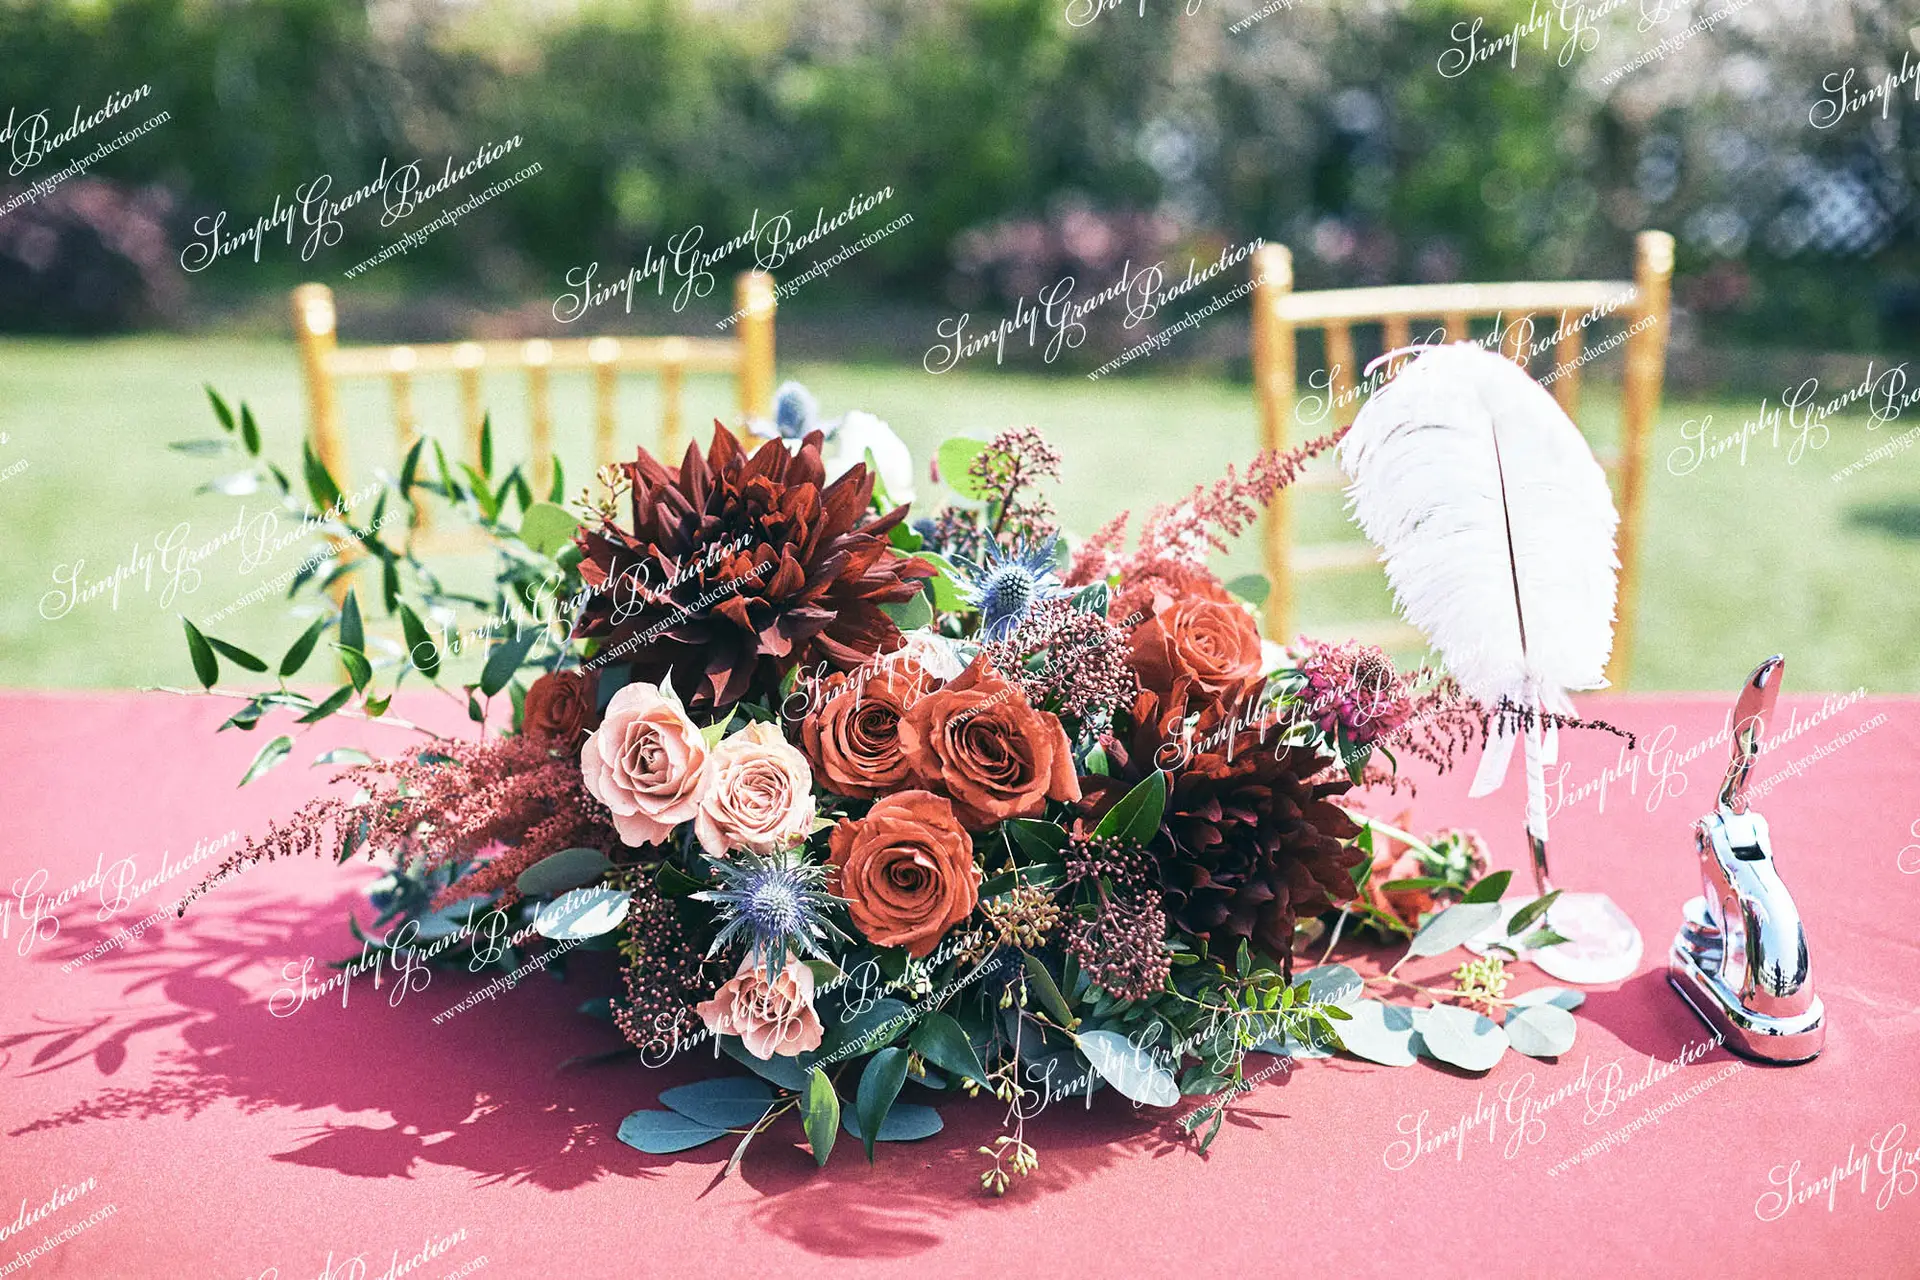 Simply_Grand_Production_Outdoor_wedding_decoration_reception_centerpiece_Country_Club_2_3.jpg